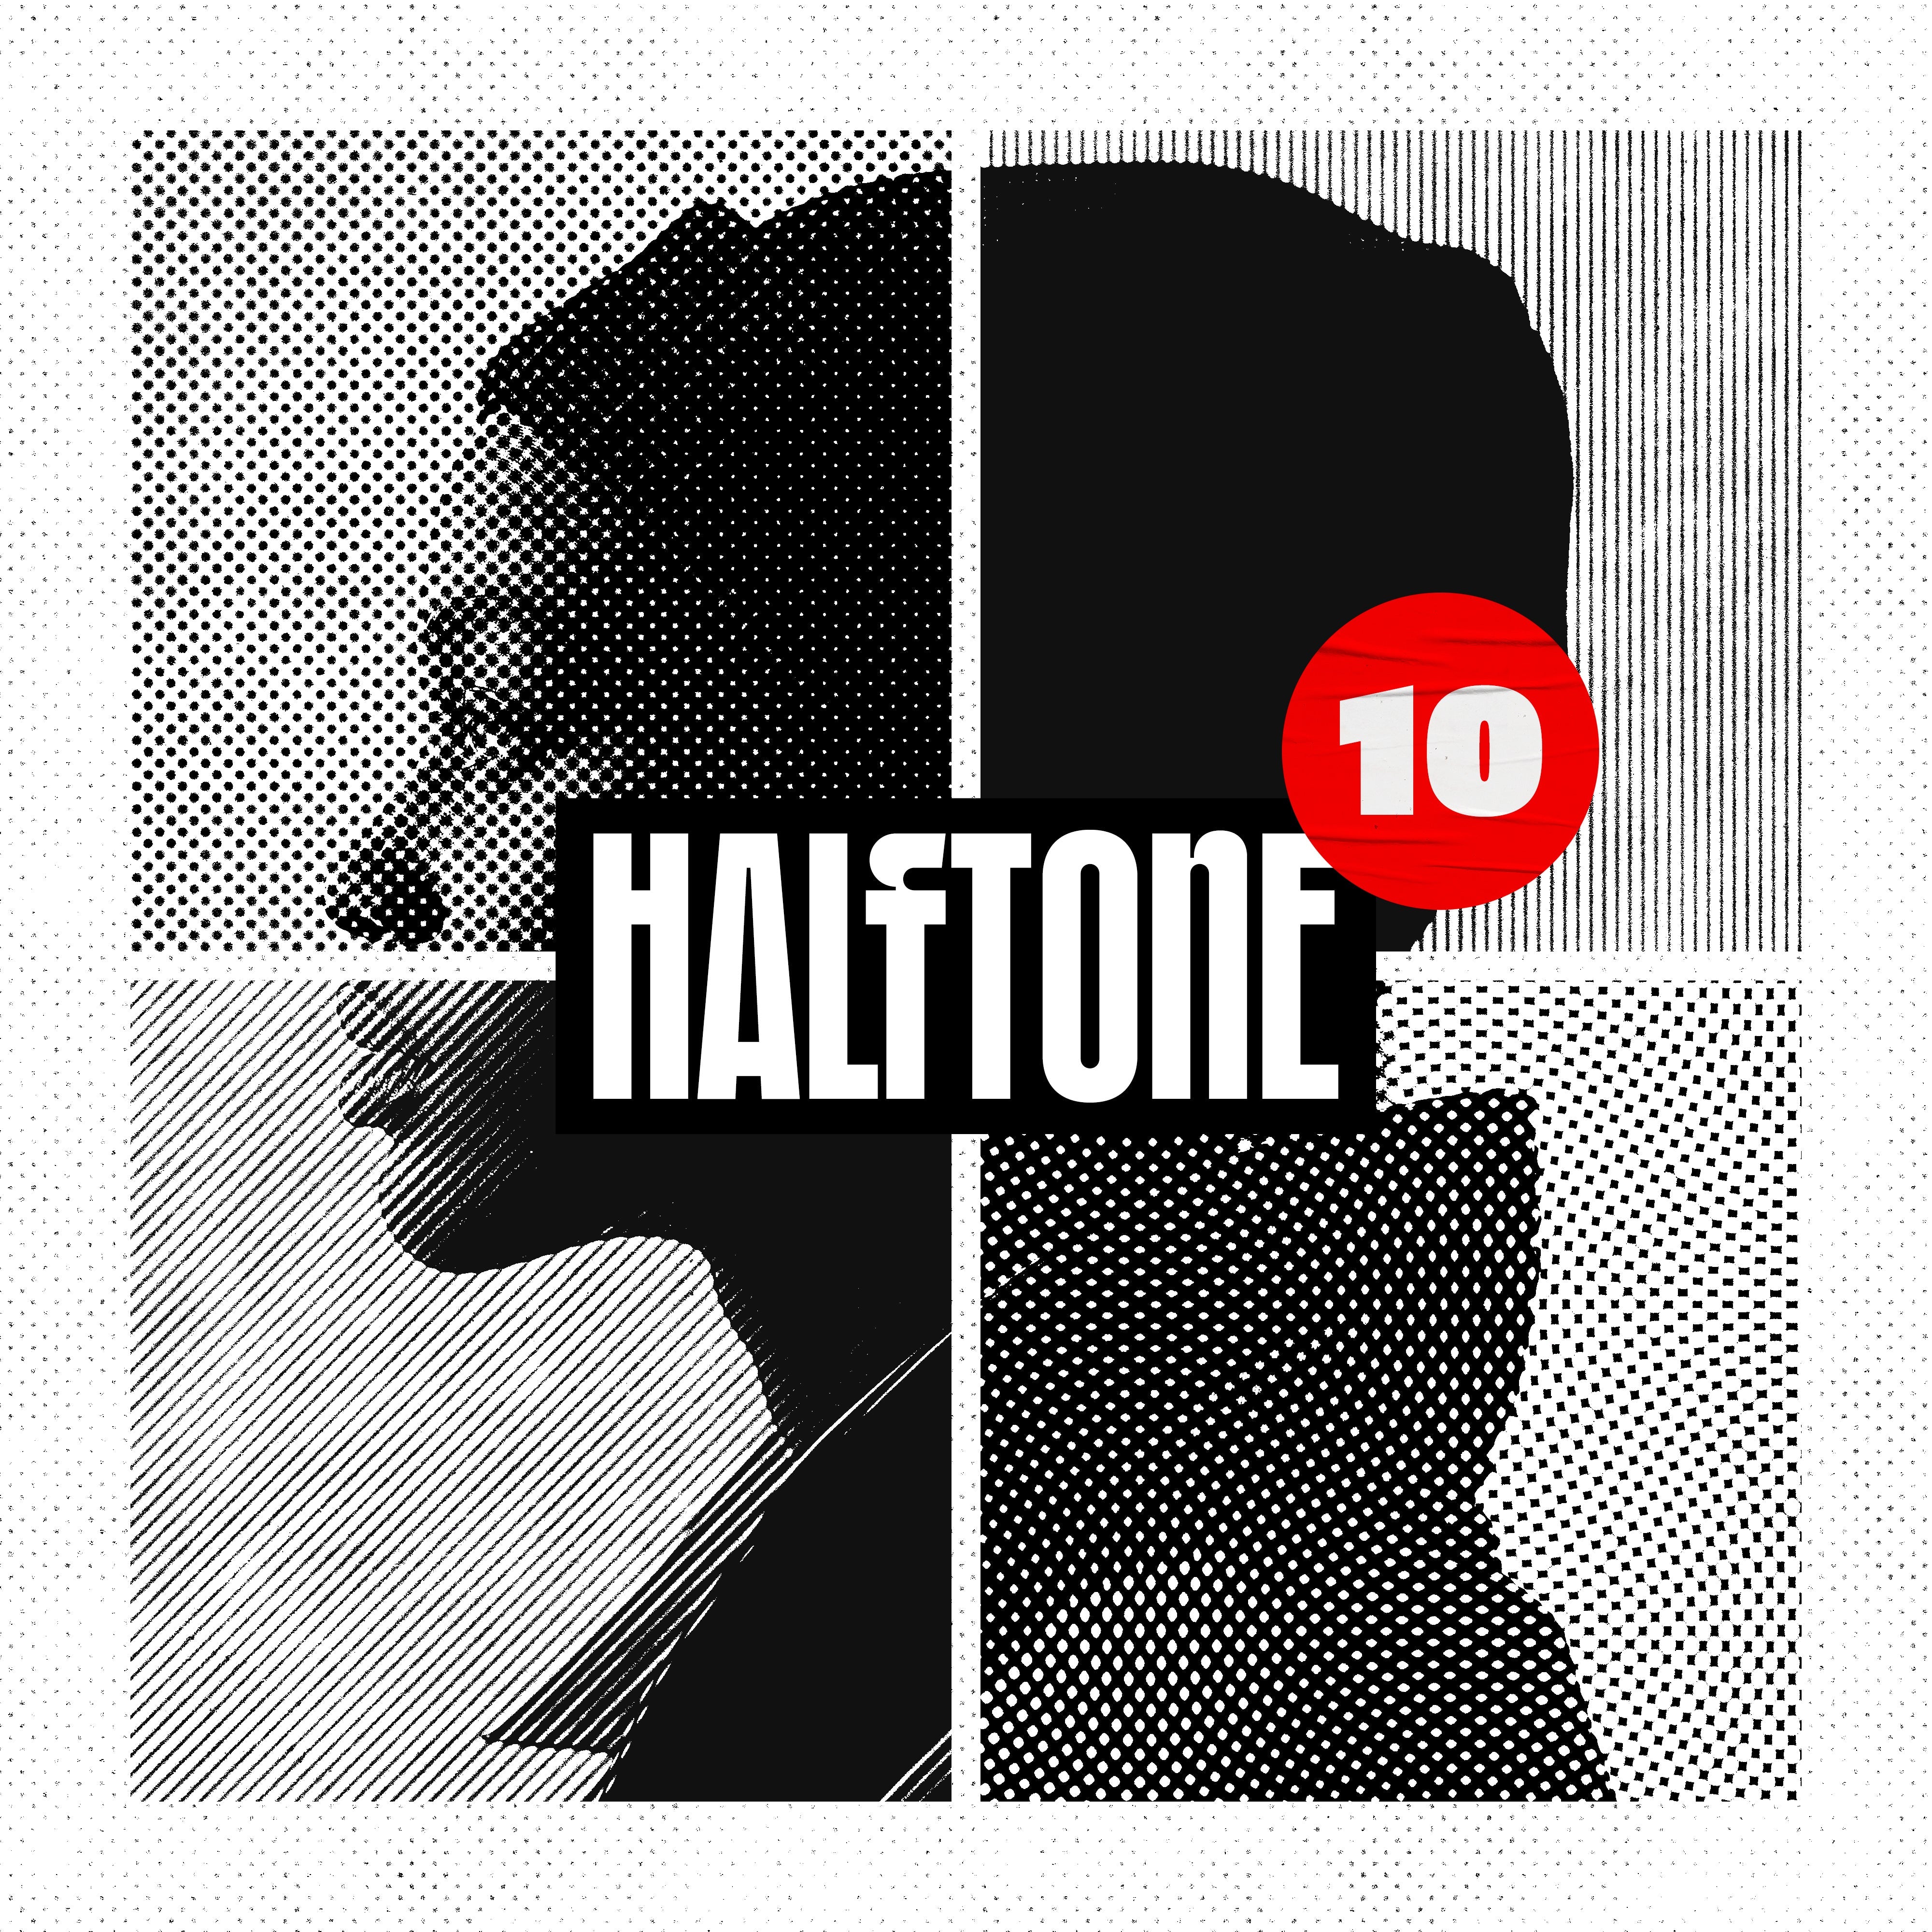 Classic Halftone Photo Effects